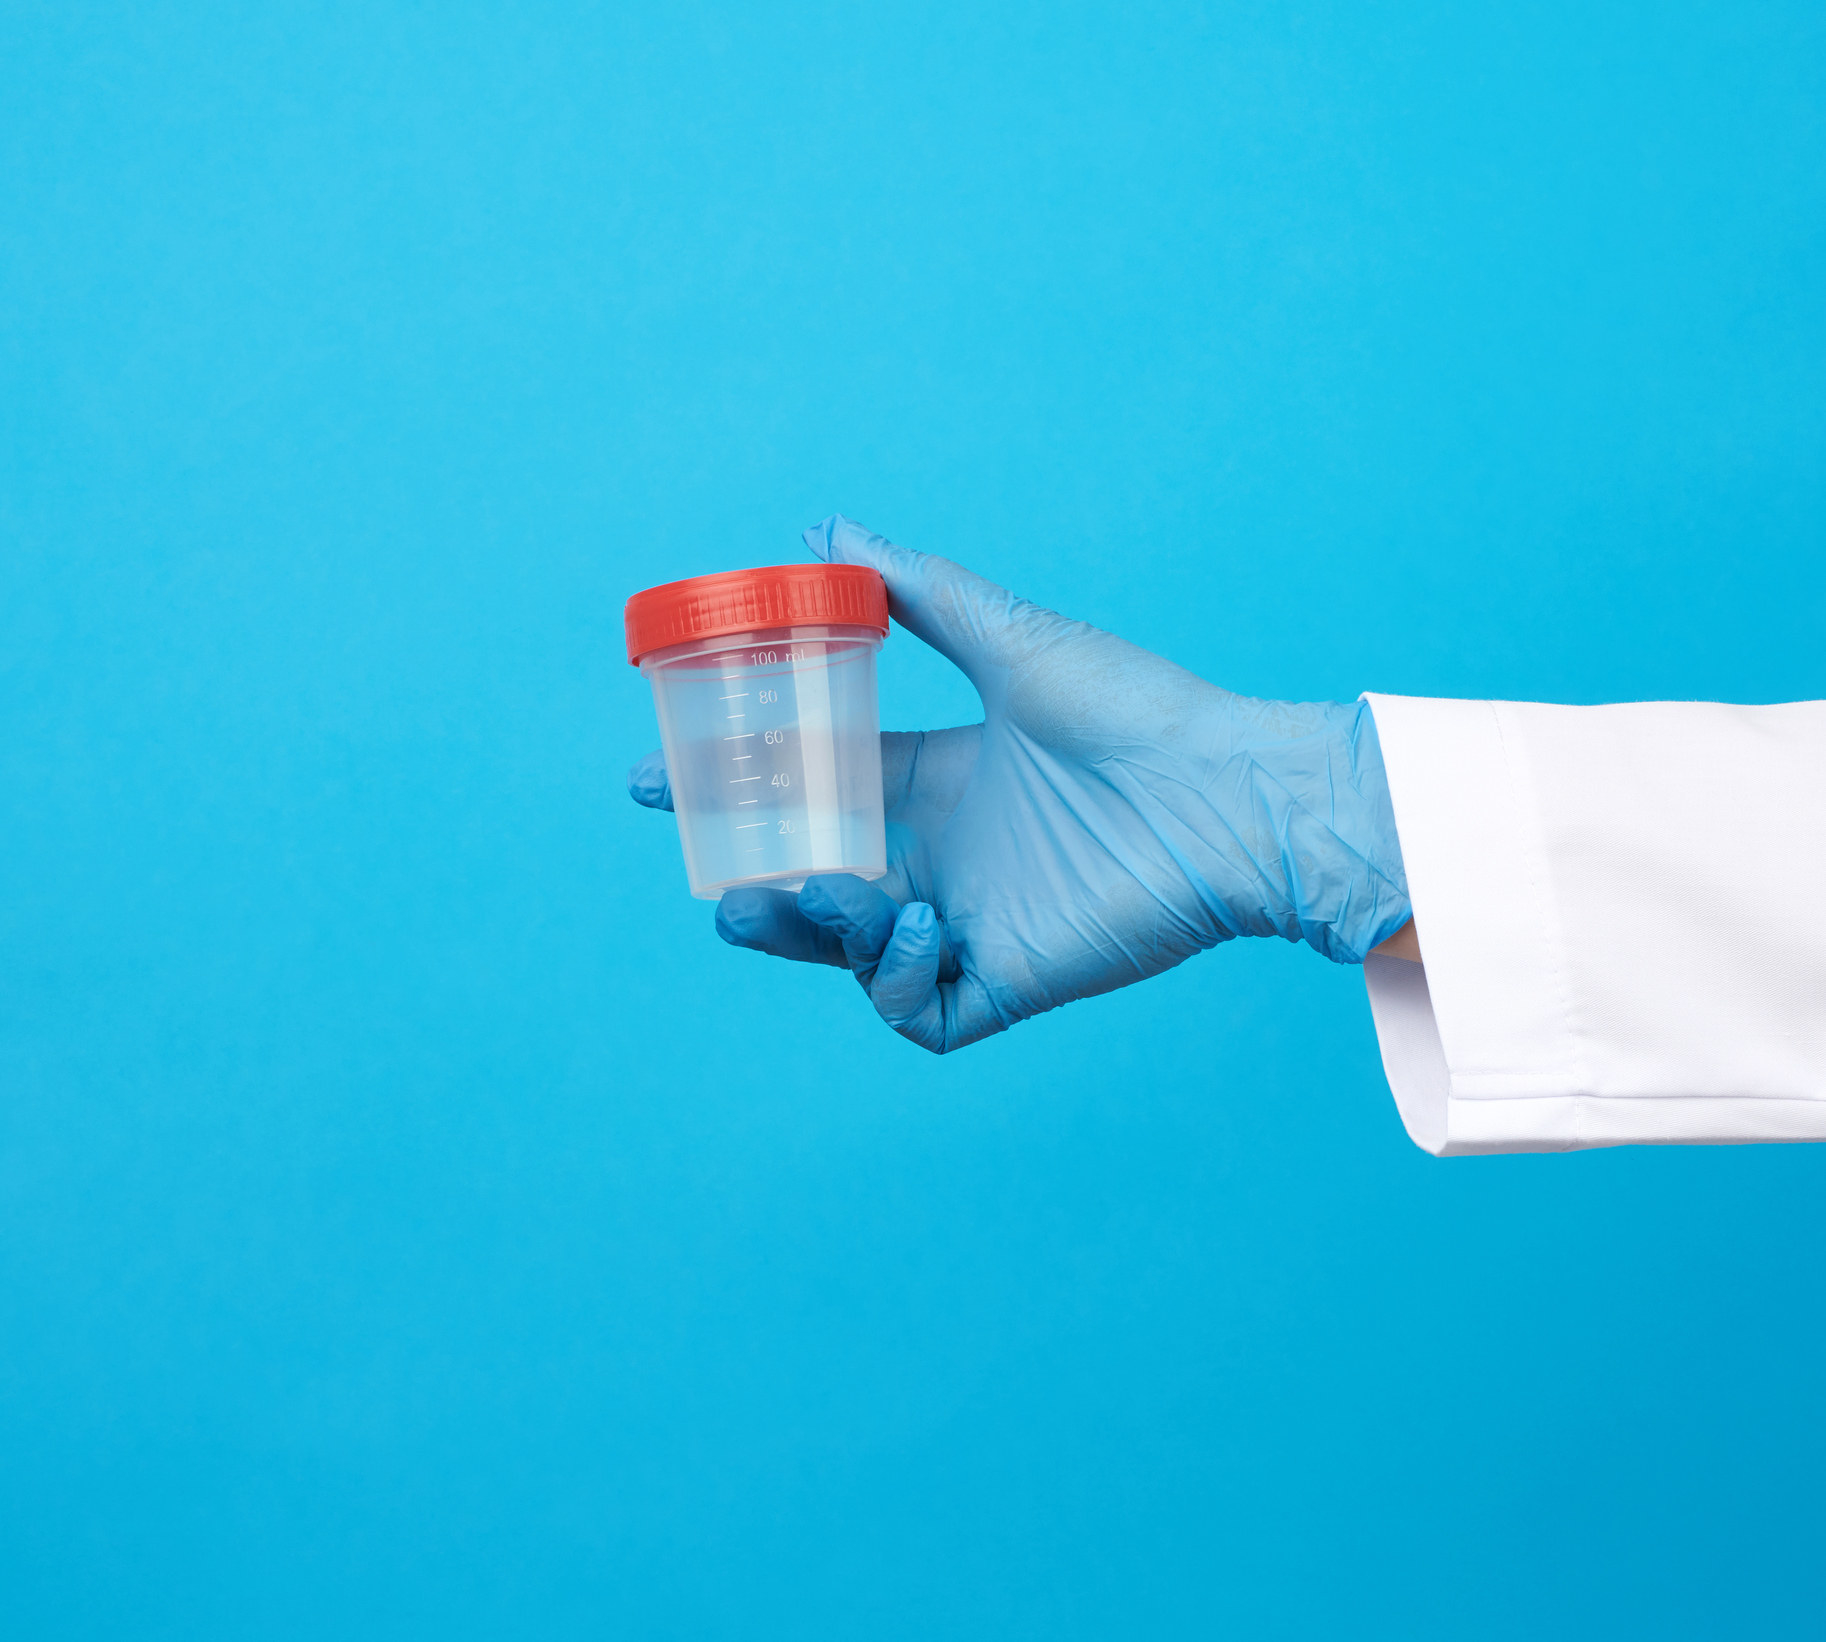 Stock image of a gloved hand holding a drug testing kit